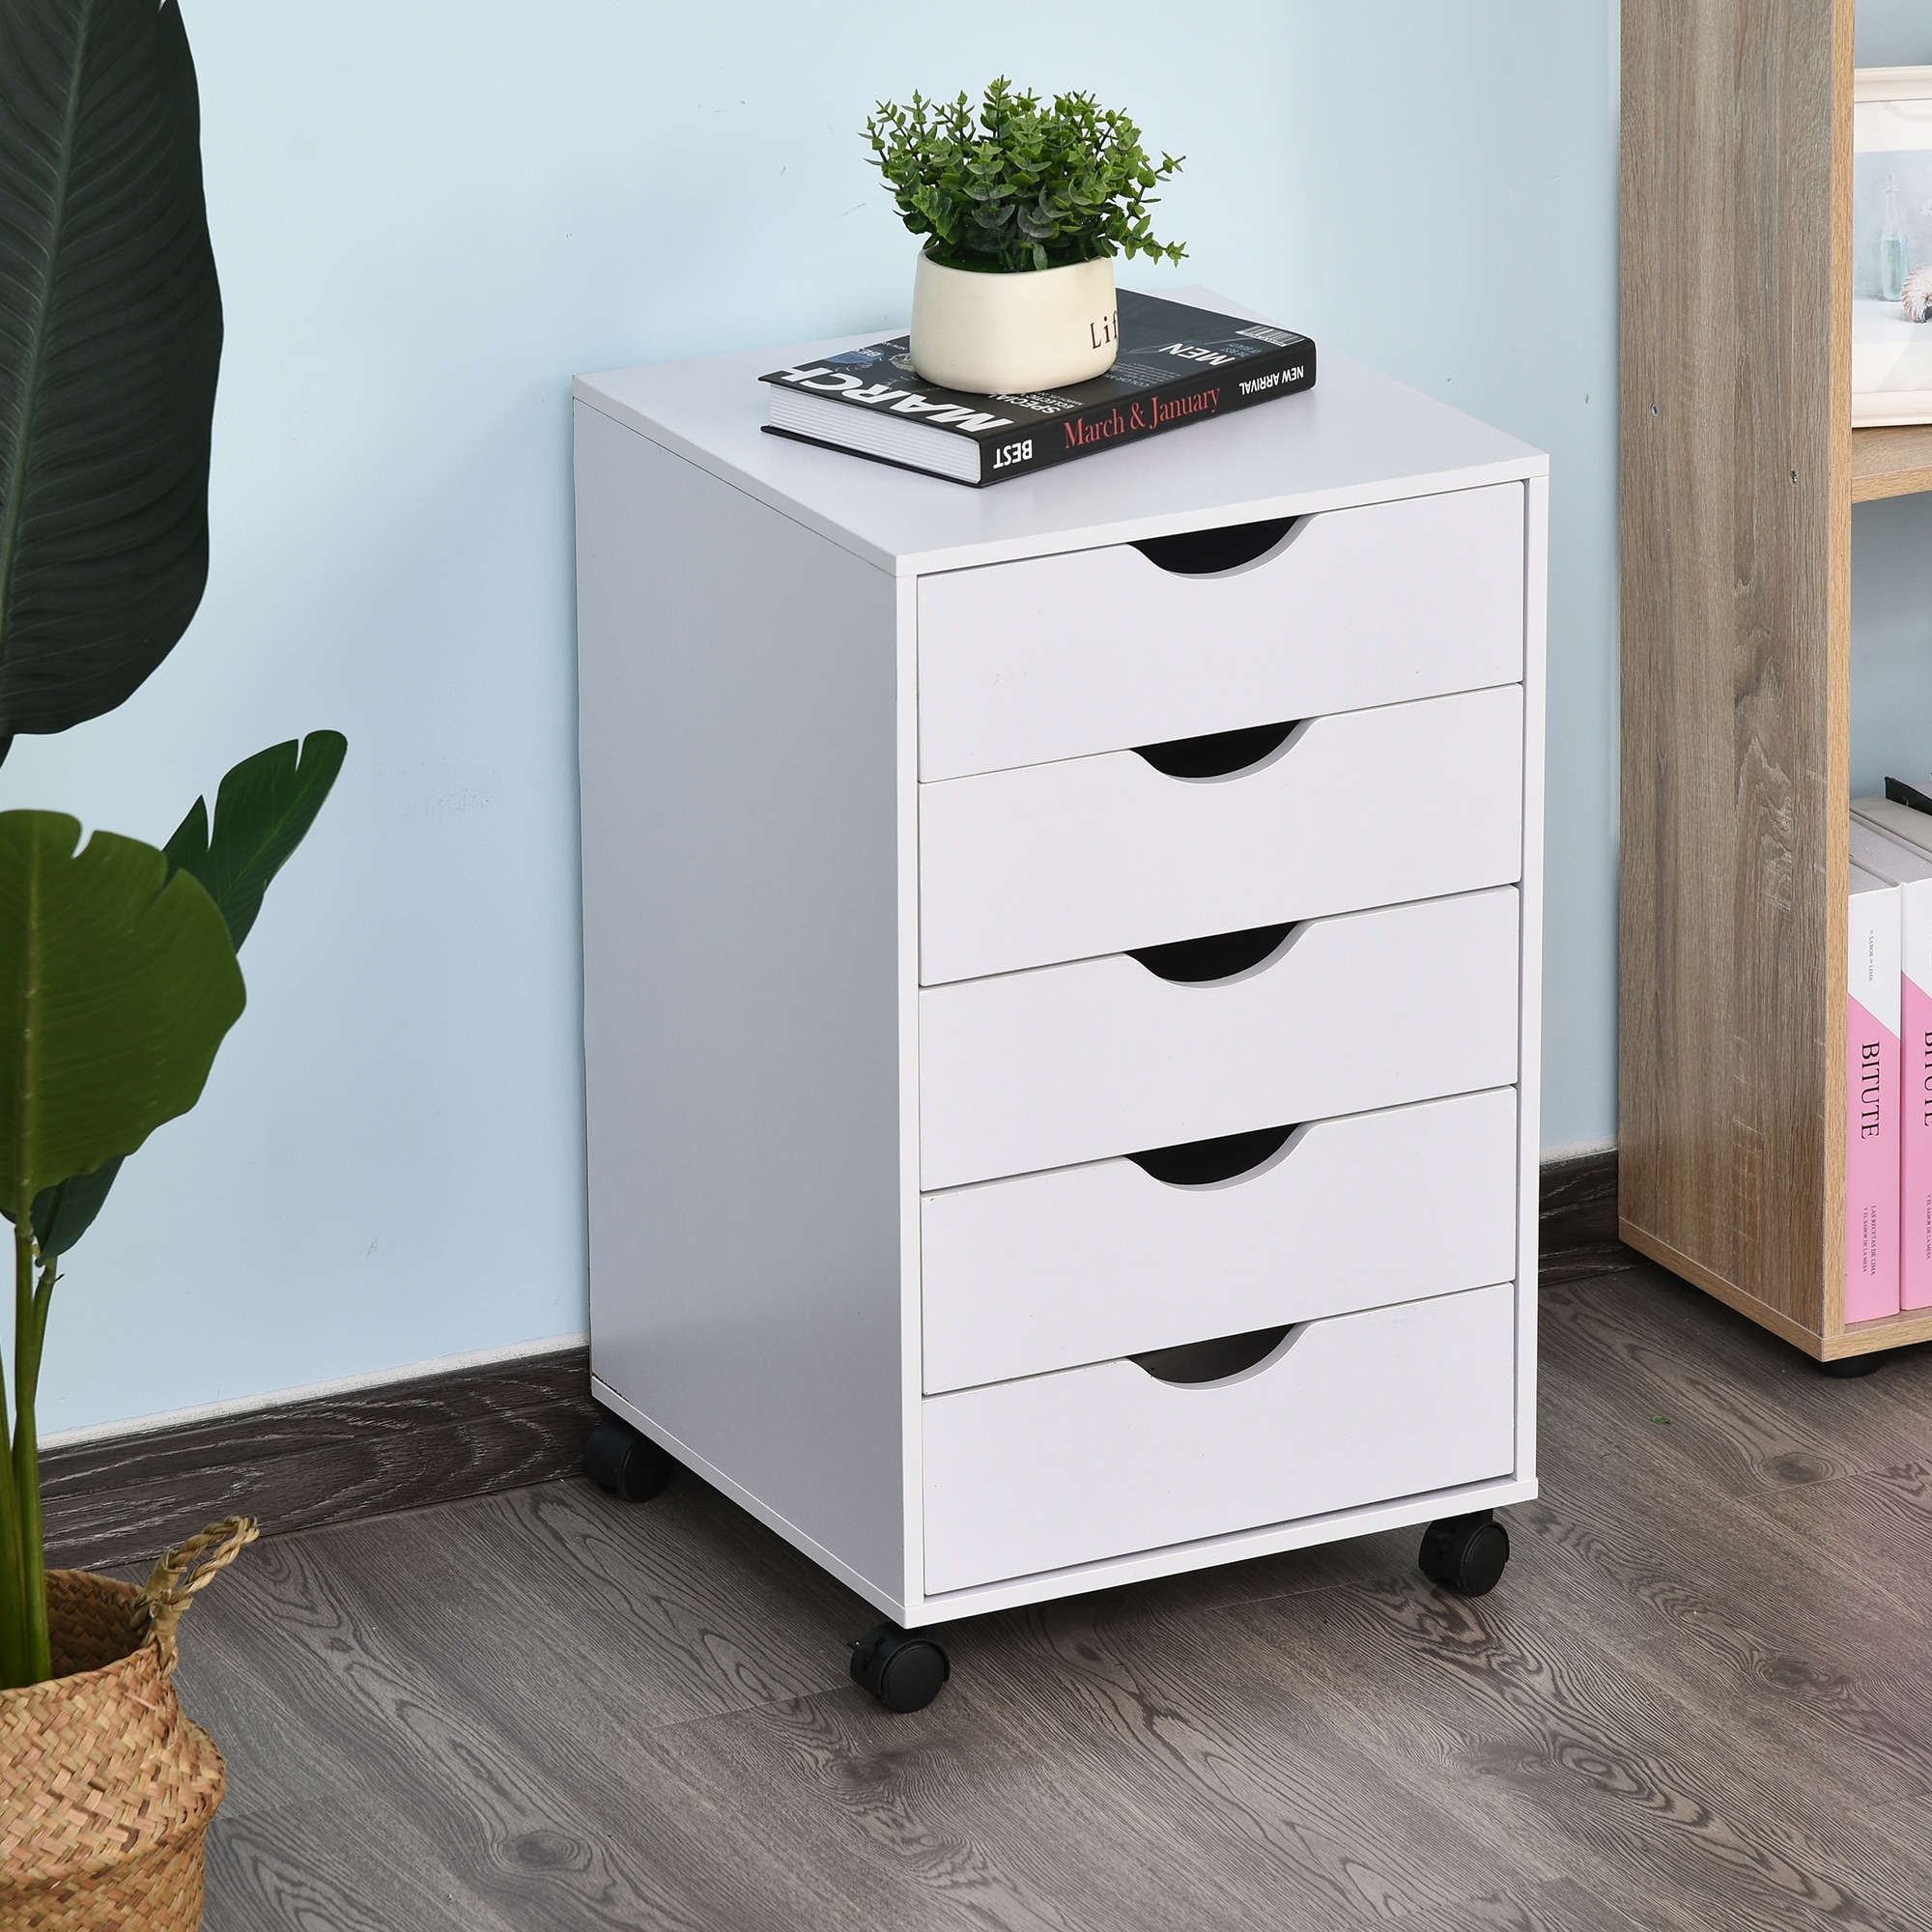 https://ak1.ostkcdn.com/images/products/is/images/direct/248486159e78f416da0b86a4fc7e8872d7327d82/HomCom-5-Drawer-Storage-Organizer-Filing-Cabinet-with-Nordic-Minimalist-Modern-Style-%26-Caster-Wheels-for-Mobility.jpg